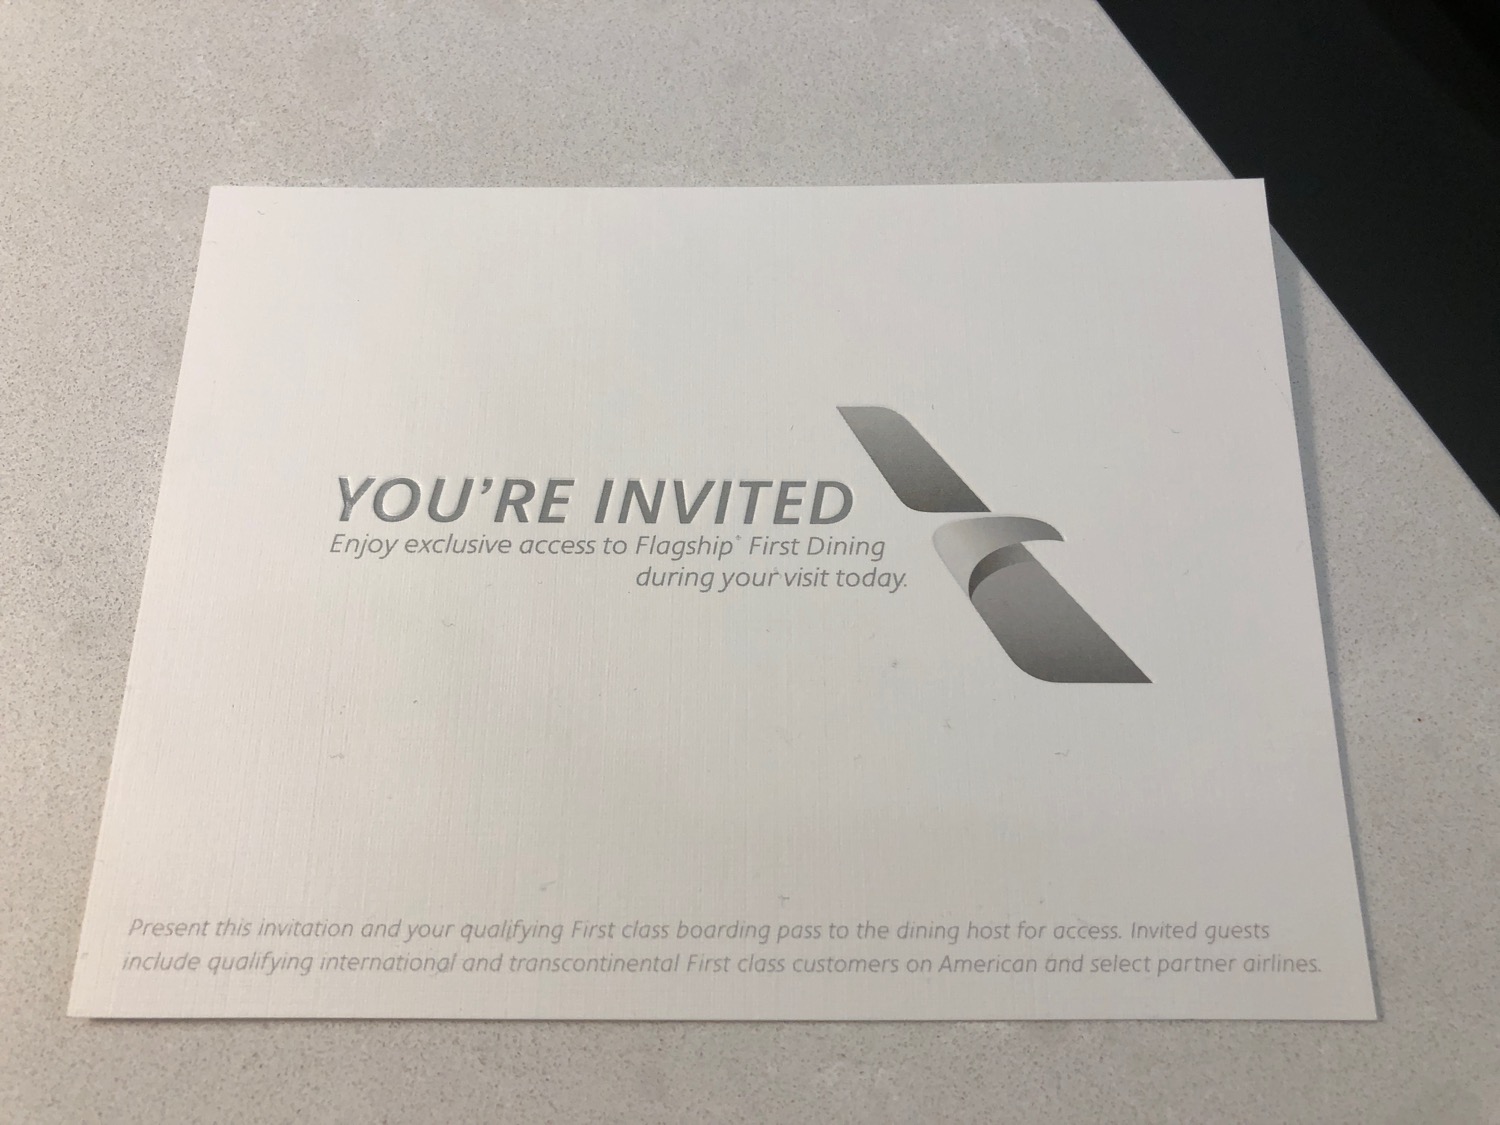 a white rectangular invitation with grey text and black text